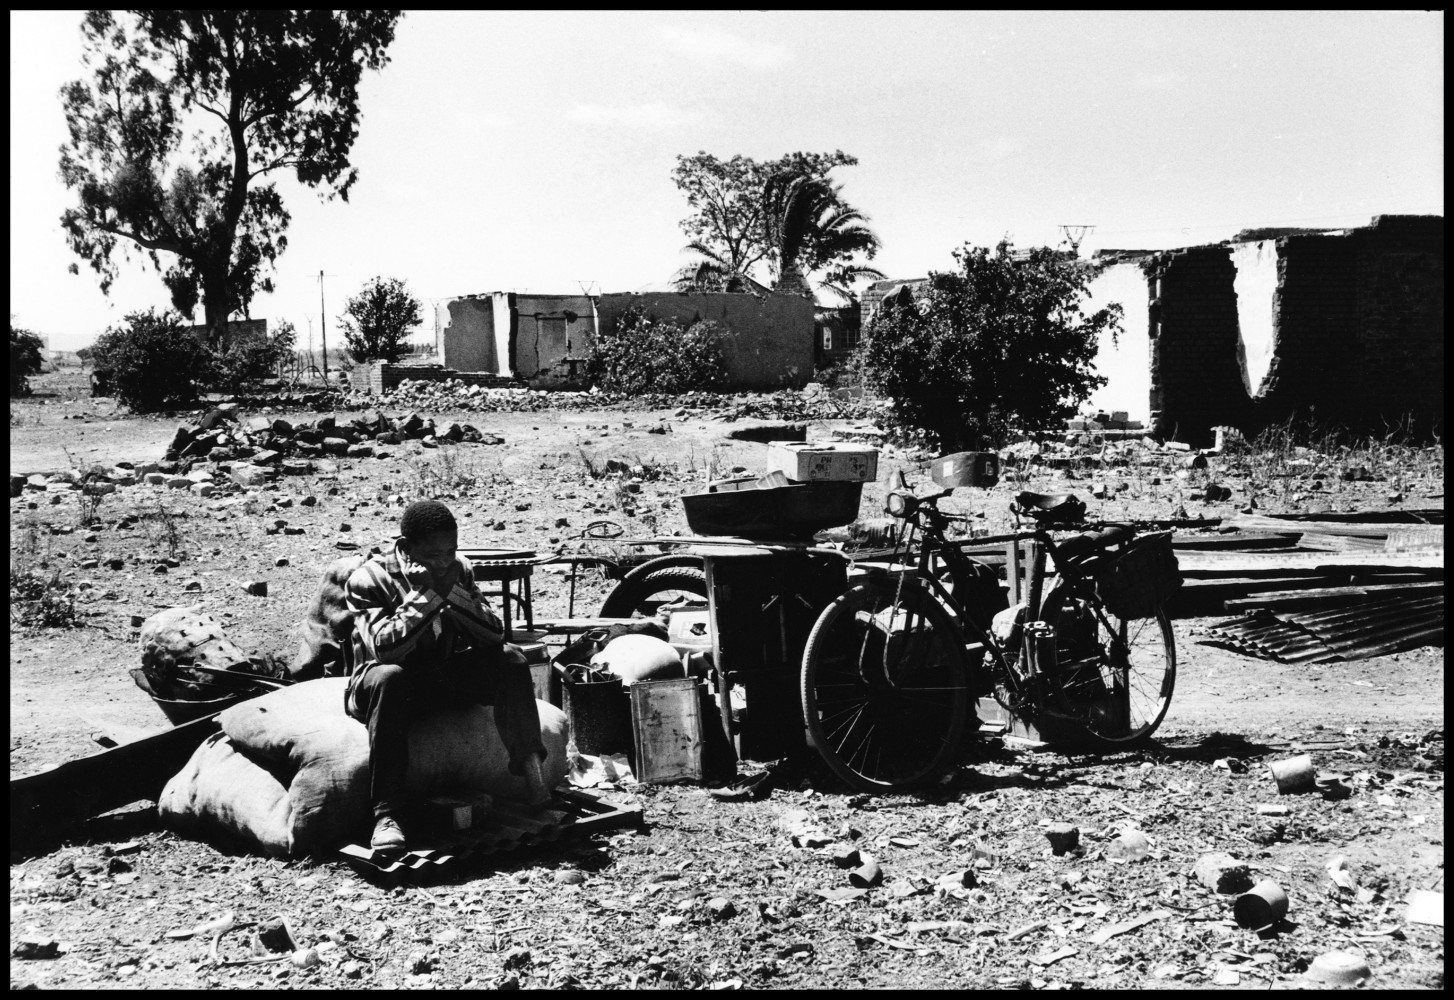 The Harsh Realities Of Apartheid Era South Africa Through A Black South